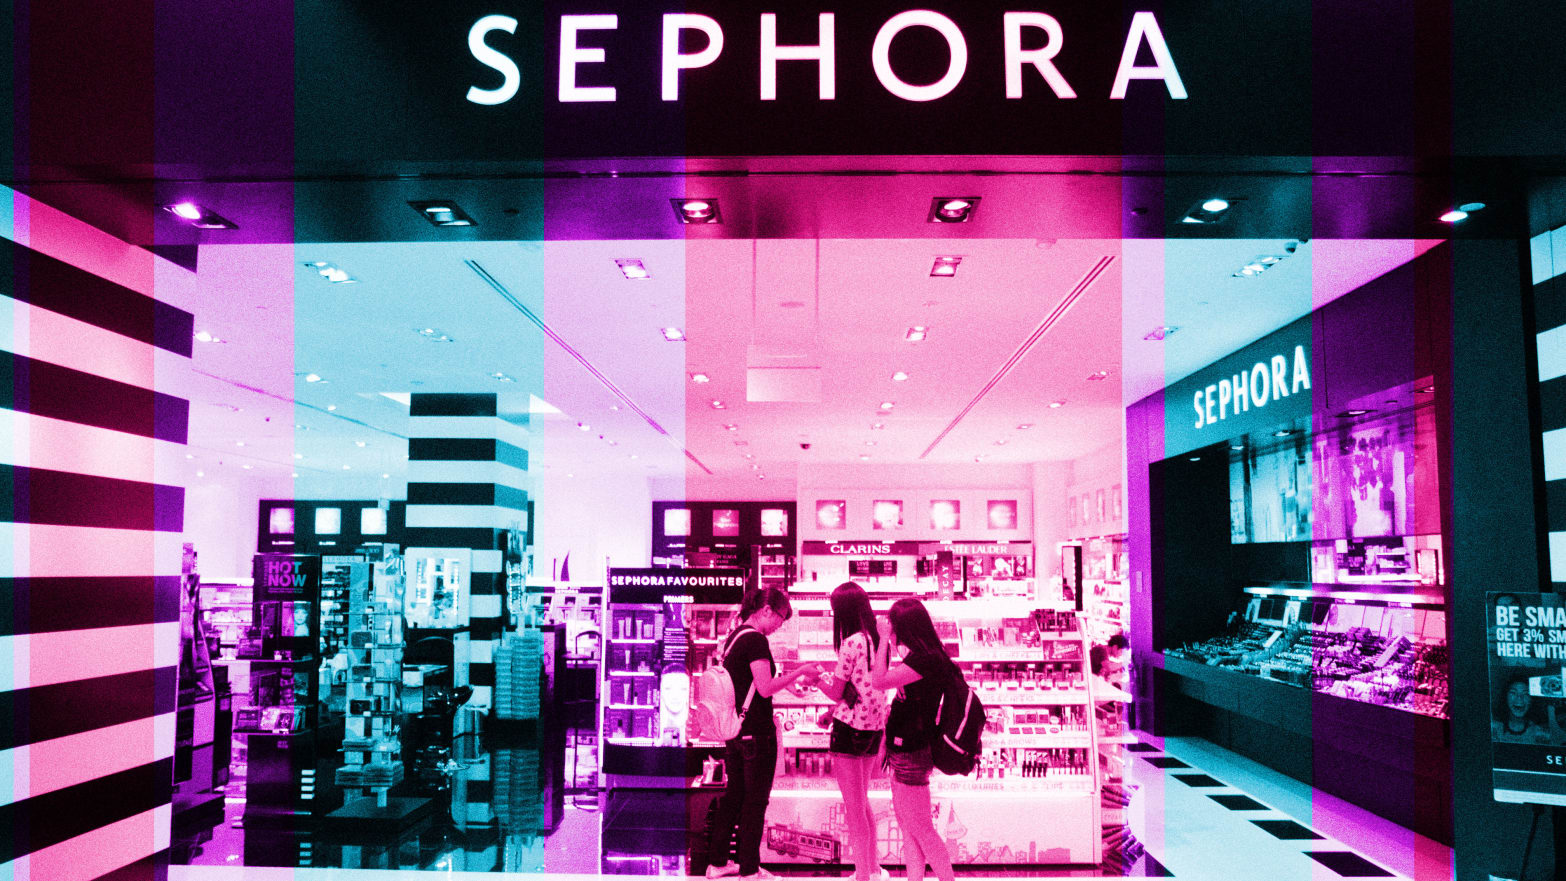 A photo illustration showing tweens in front of a Sephora store.